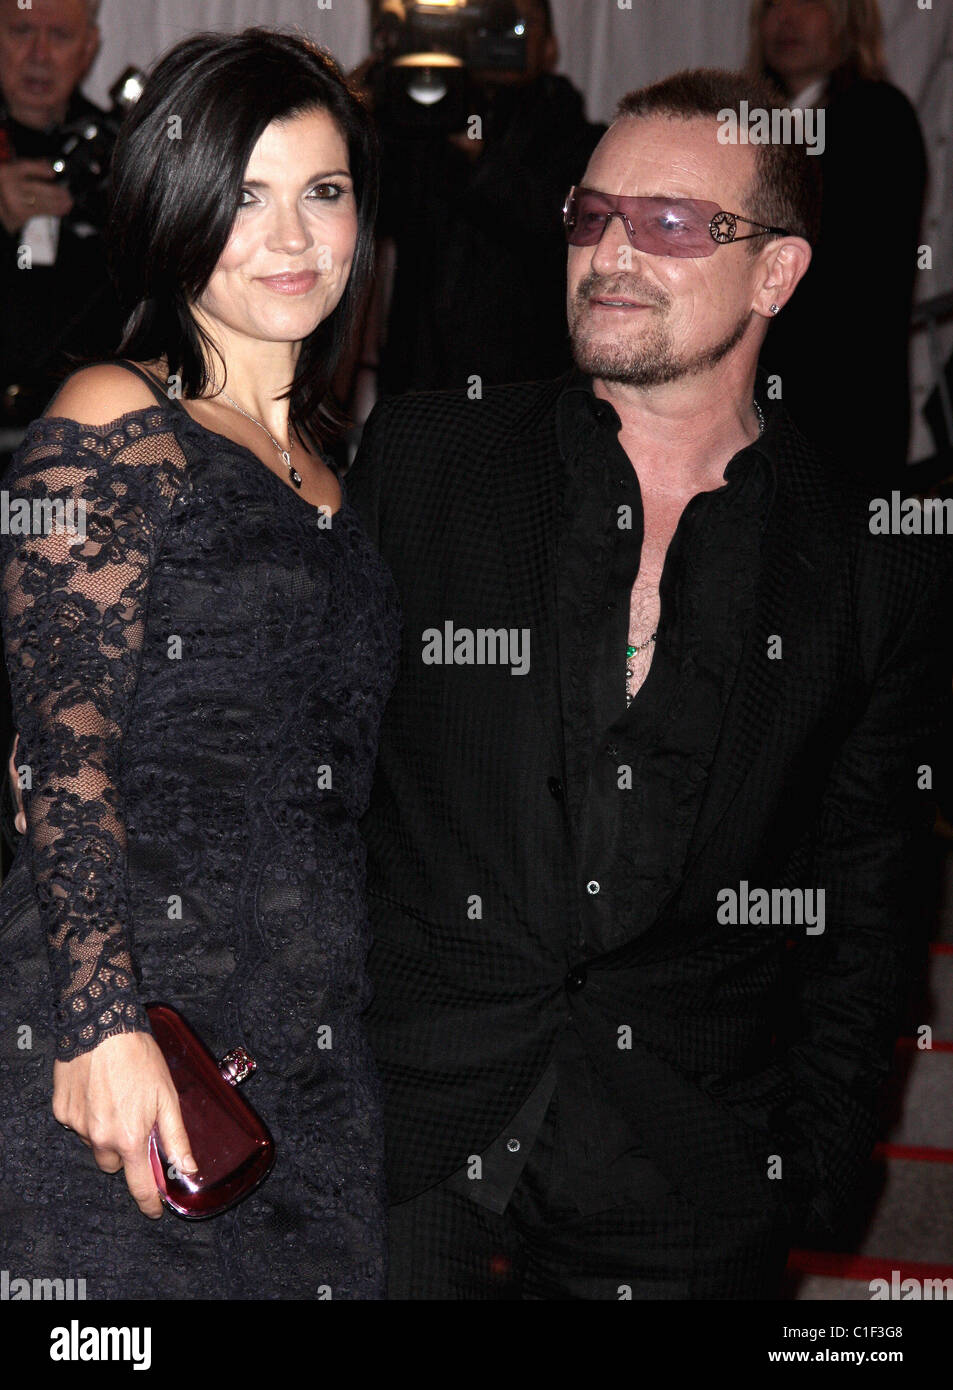 Ali Hewson and Bono 'The Model As Muse: Embodying Fashion' Costume Institute Gala at The Metropolitan Museum of Art - Arrivals Stock Photo